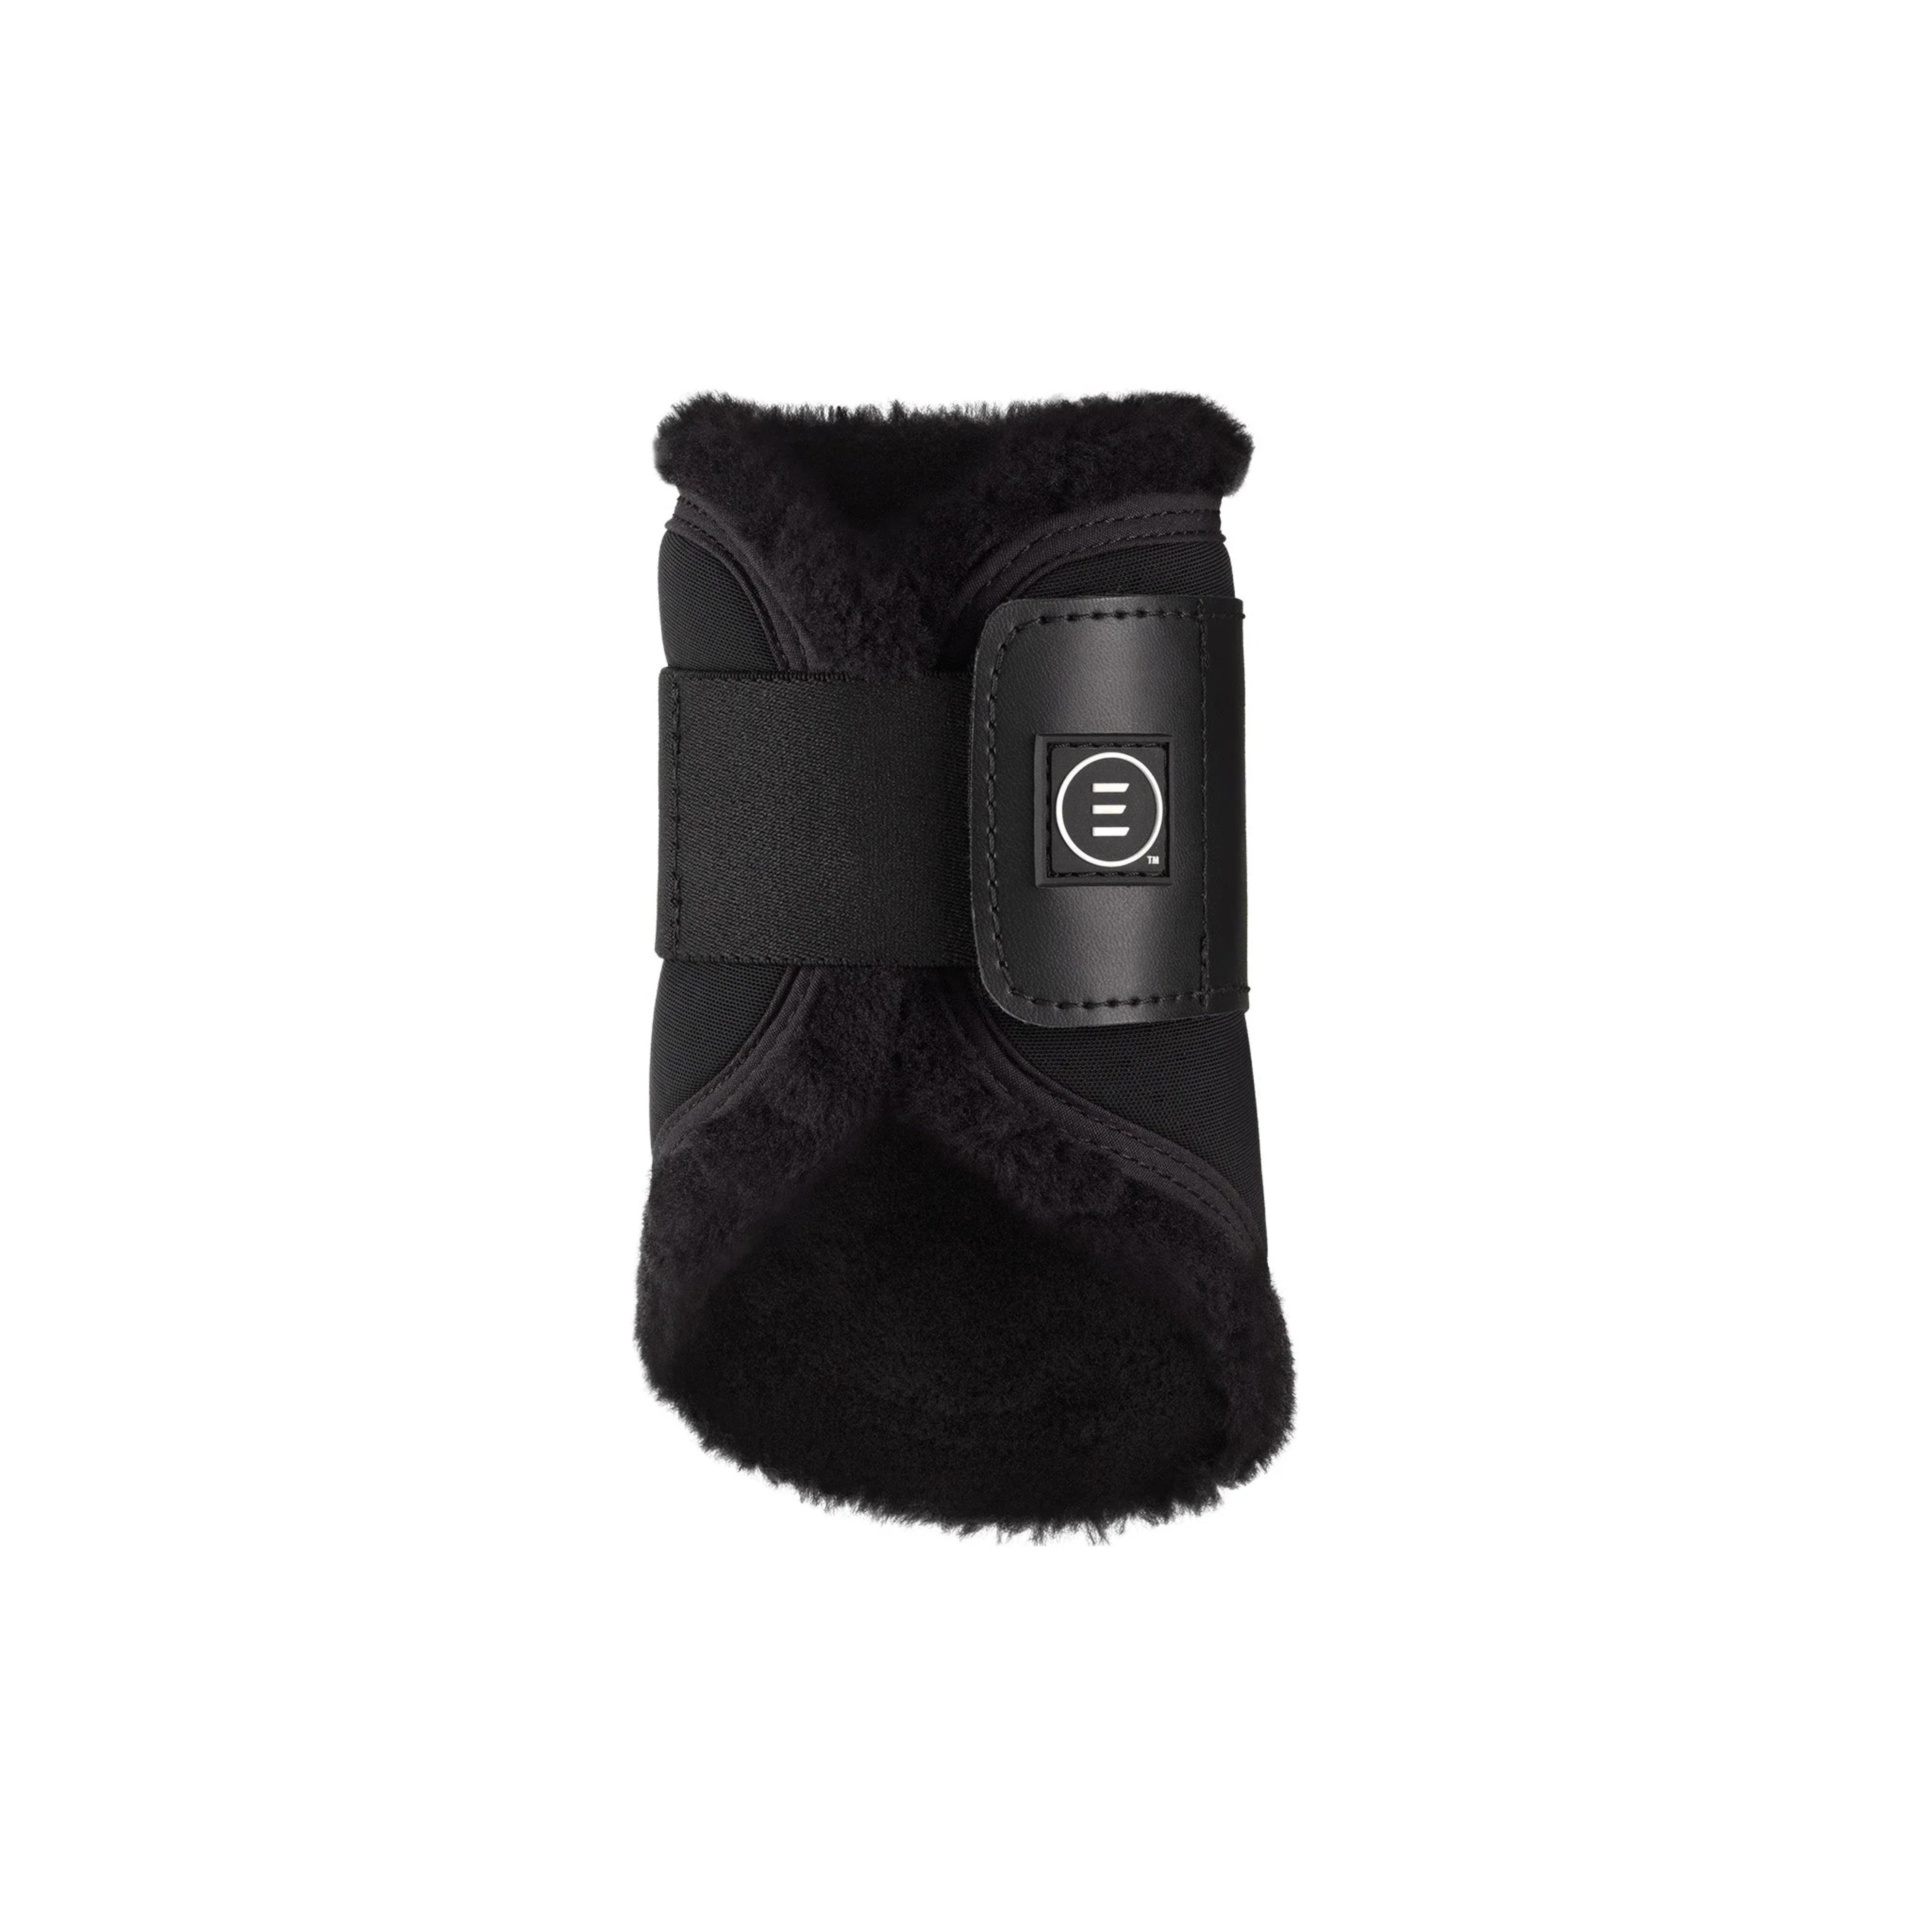 EquiFit Everyday Hind Boot Vegan SheepsWool